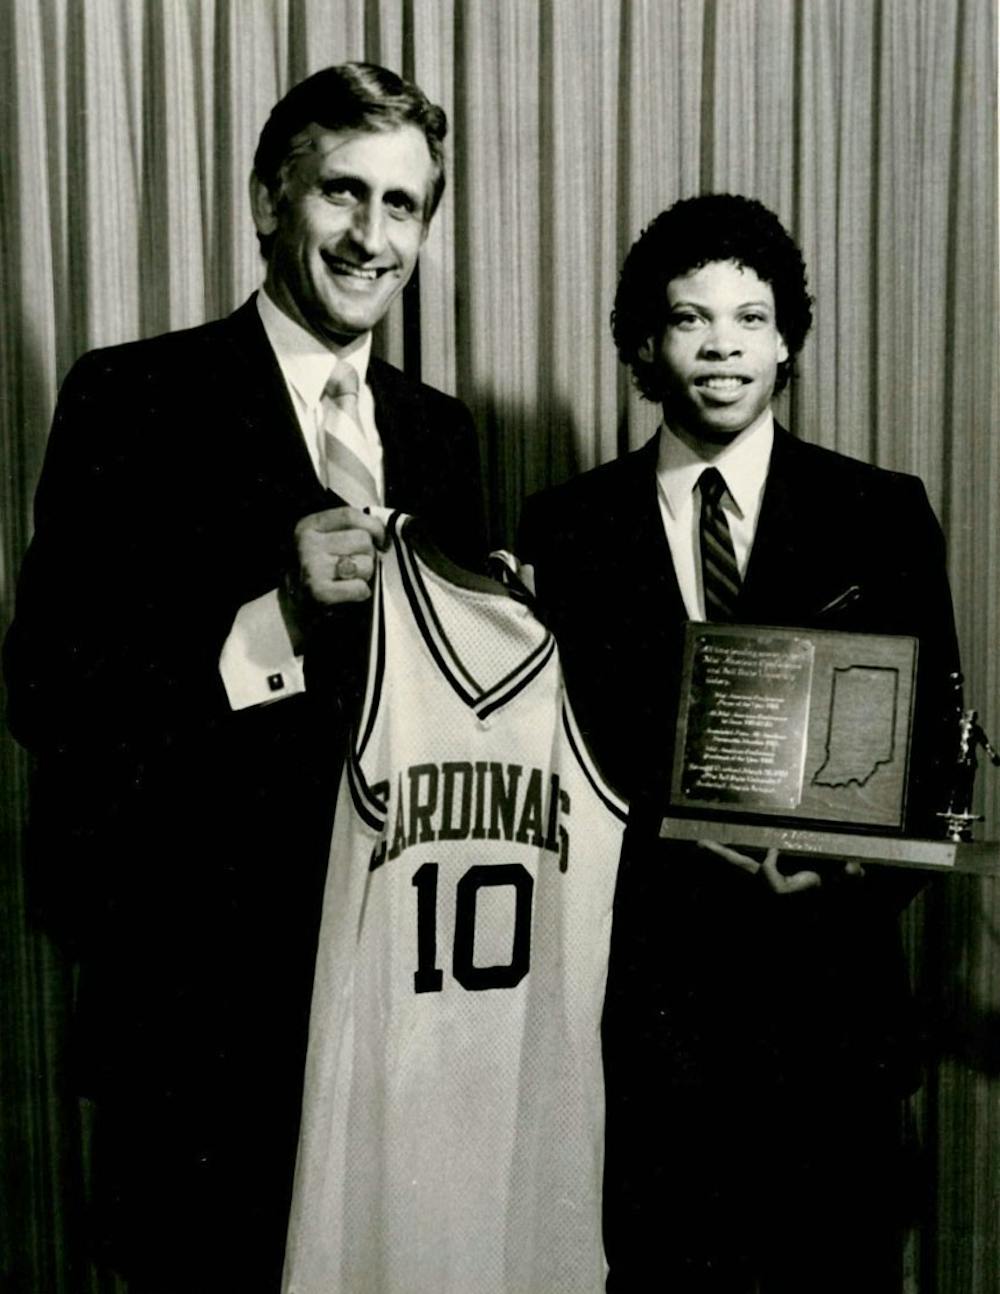 Craving competition: Along with his former coach, Ray McCallum reflects on his journey to the Indiana Basketball Hall of Fame